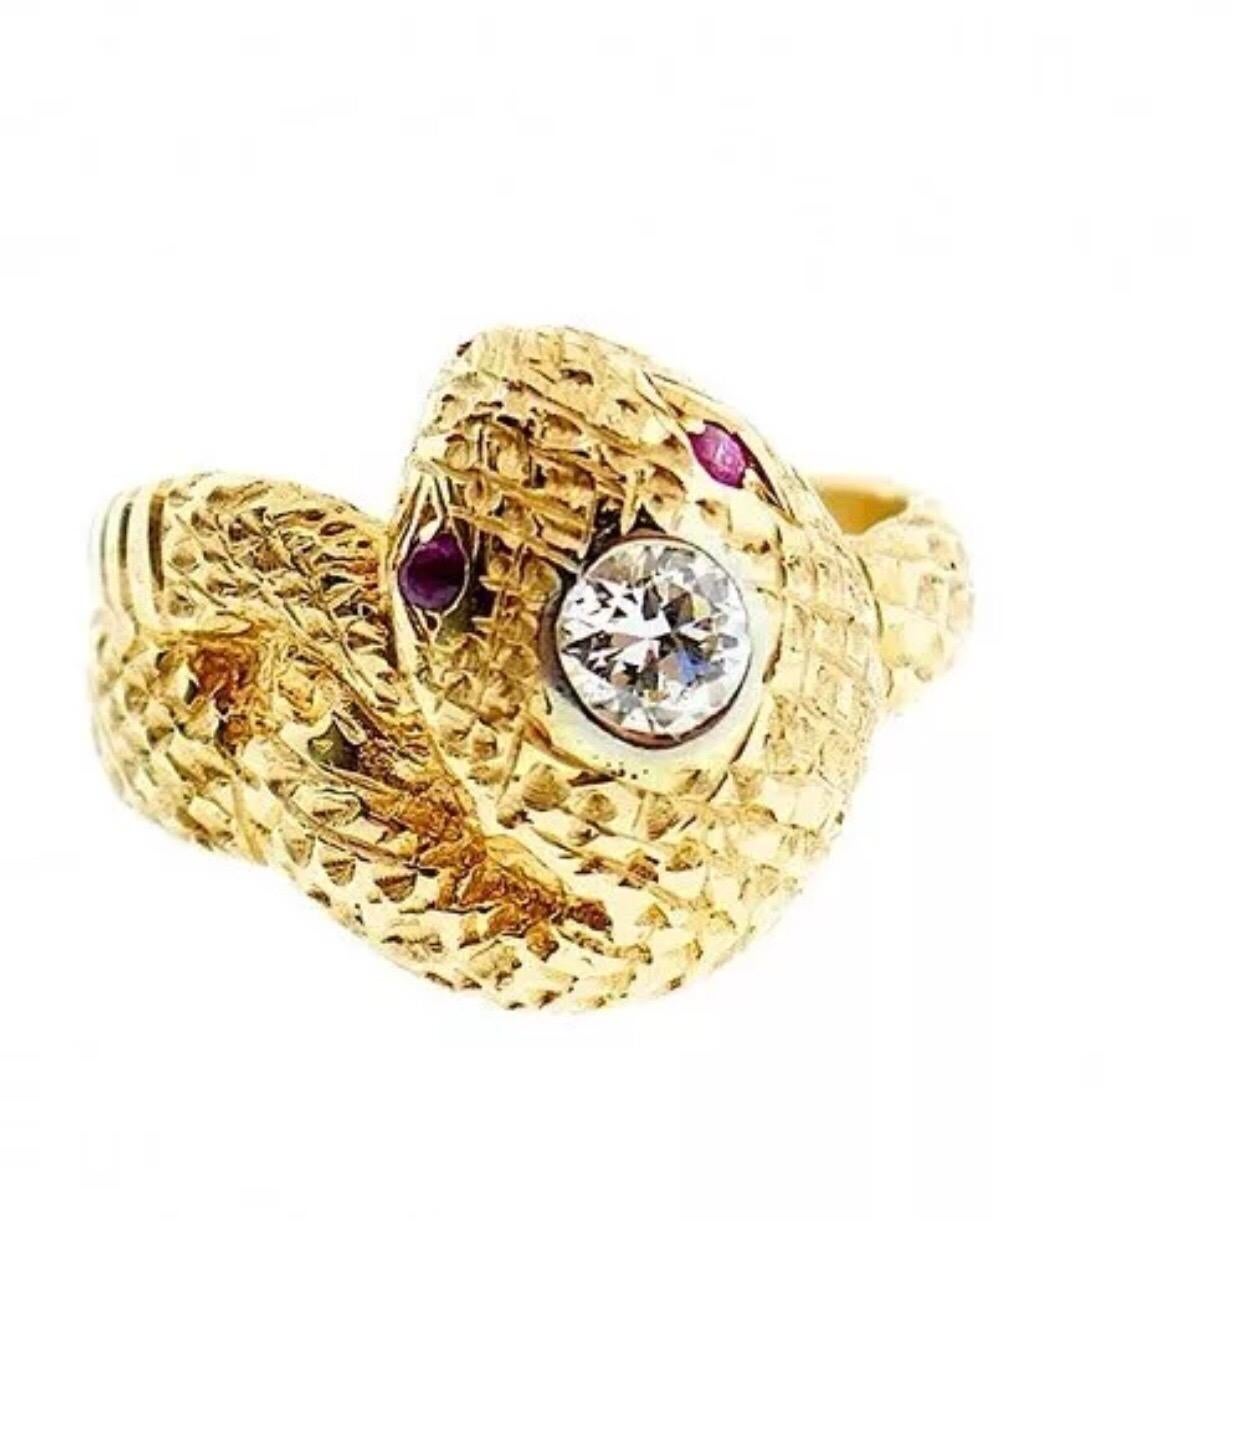 Art Deco Yellow Gold Diamond Snake Ring

This is a striking art deco 14 karat yellow gold snake ring featuring a .30 carat excellent quality diamond (j color / vvs2 clarity) and ruby eyes. 

Size: 10 U.S. (can be resized) 

Weight: 10.4 Grams